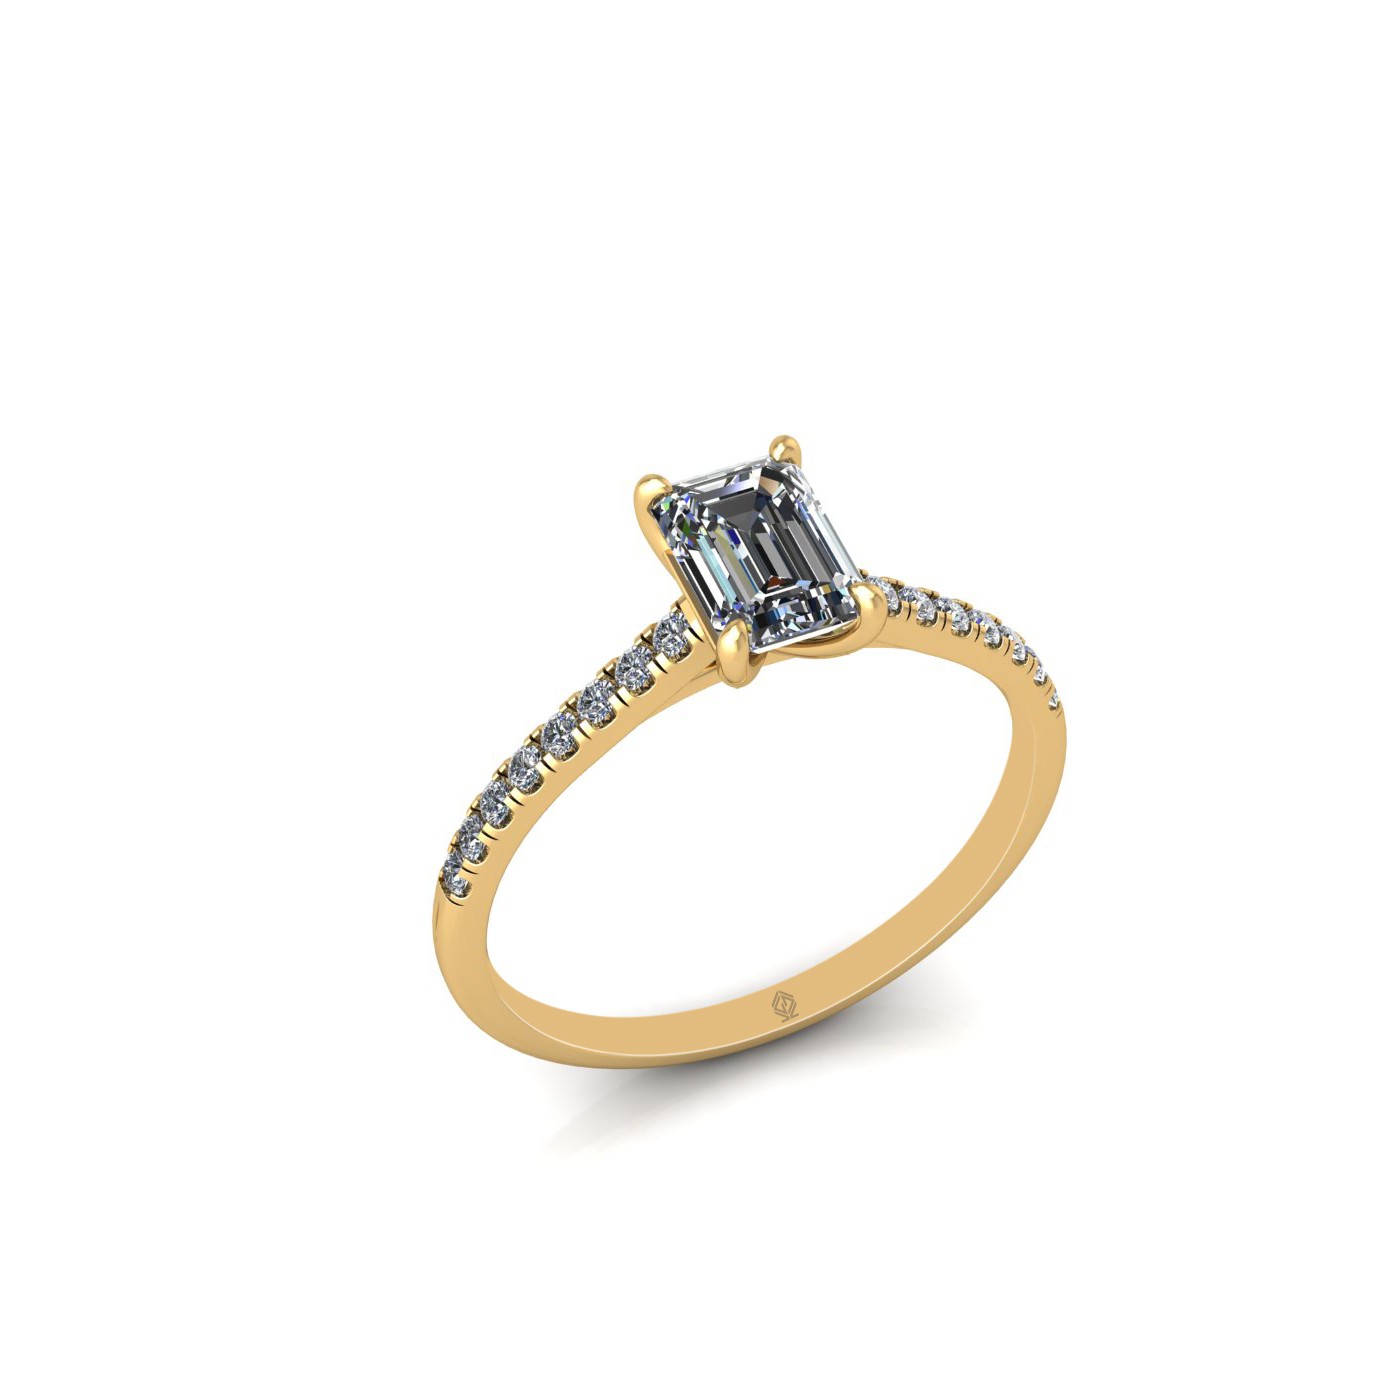 18k yellow gold  0,30 ct 4 prongs emerald cut diamond engagement ring with whisper thin pavÉ set band Photos & images